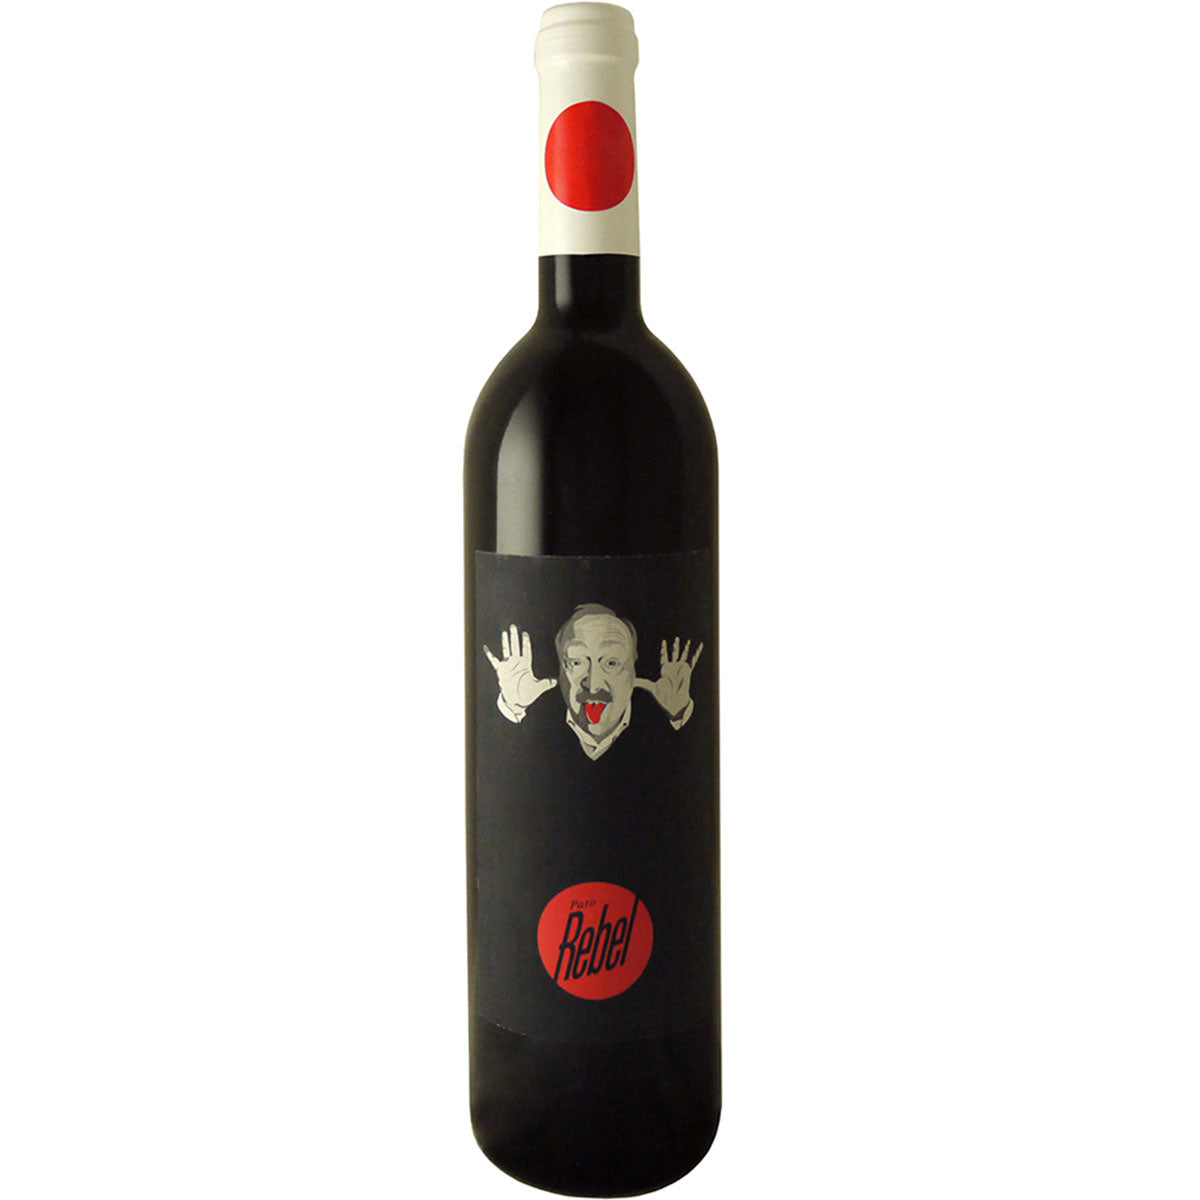 Luis Pato Rebel Red 2019